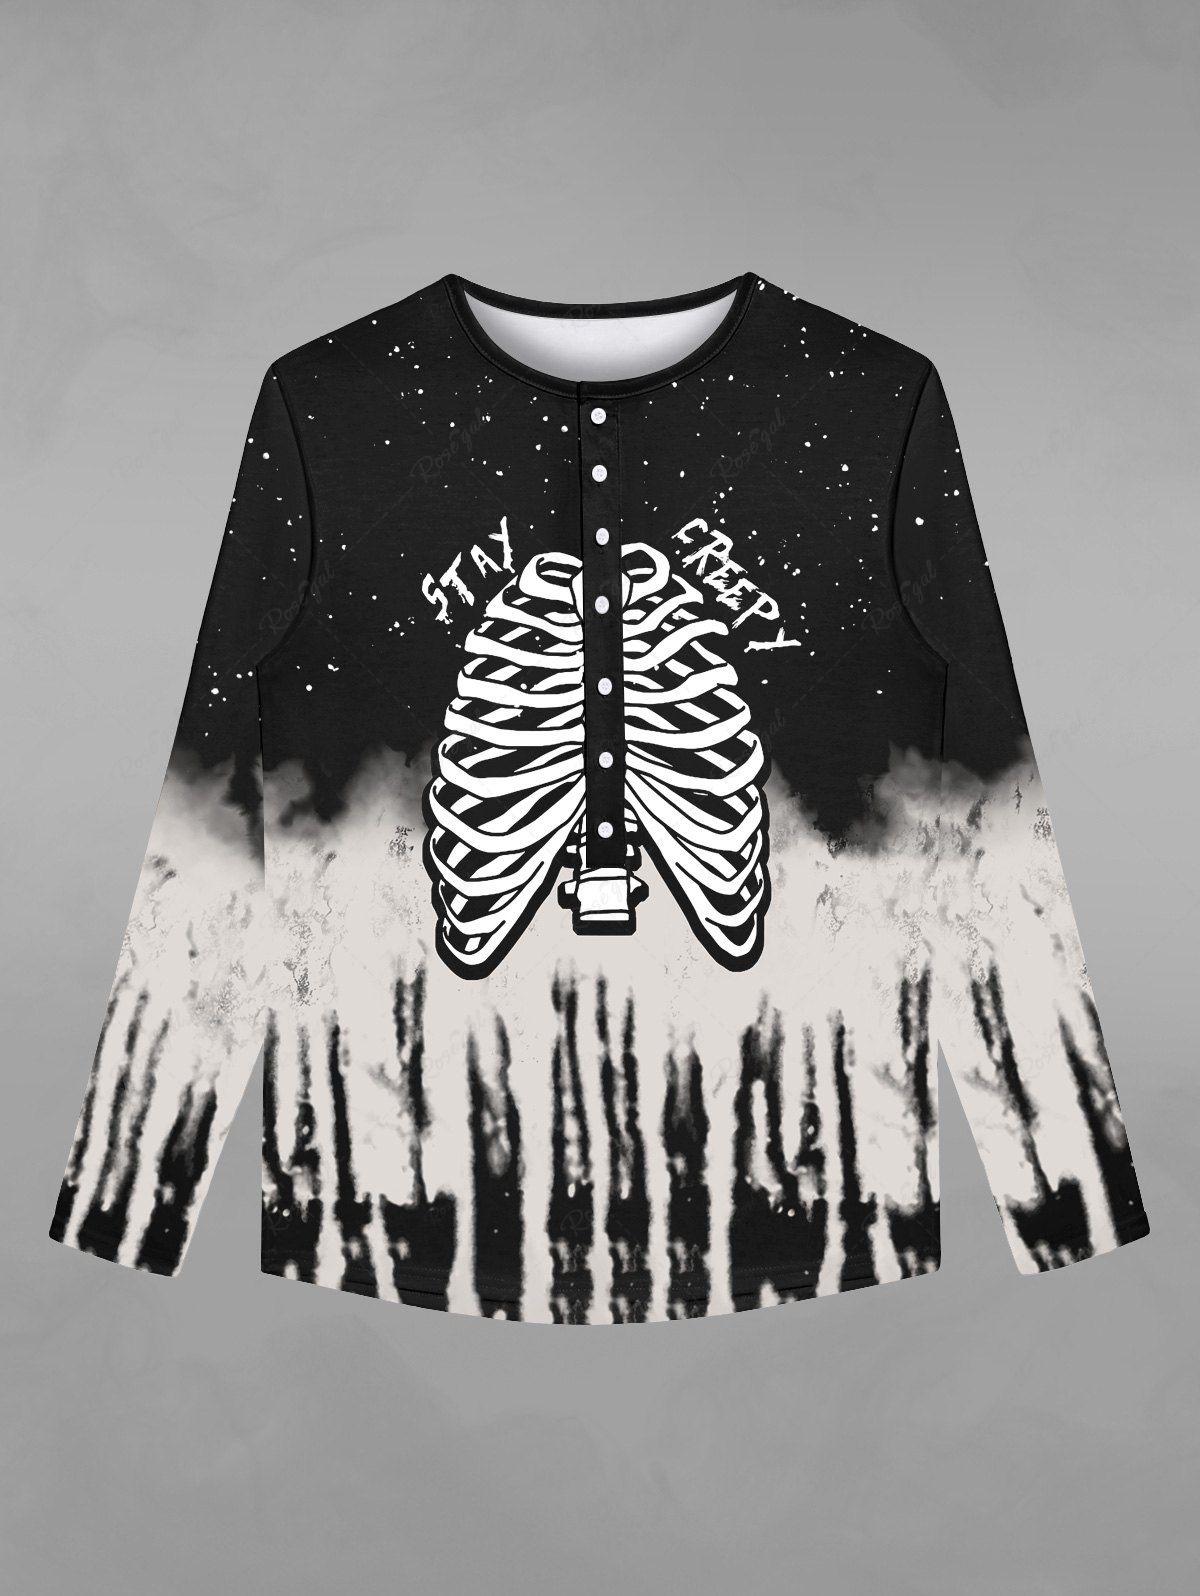 Unique Gothic Galaxy Skeleton Distressed Print Buttons Halloween T-shirt For Men  